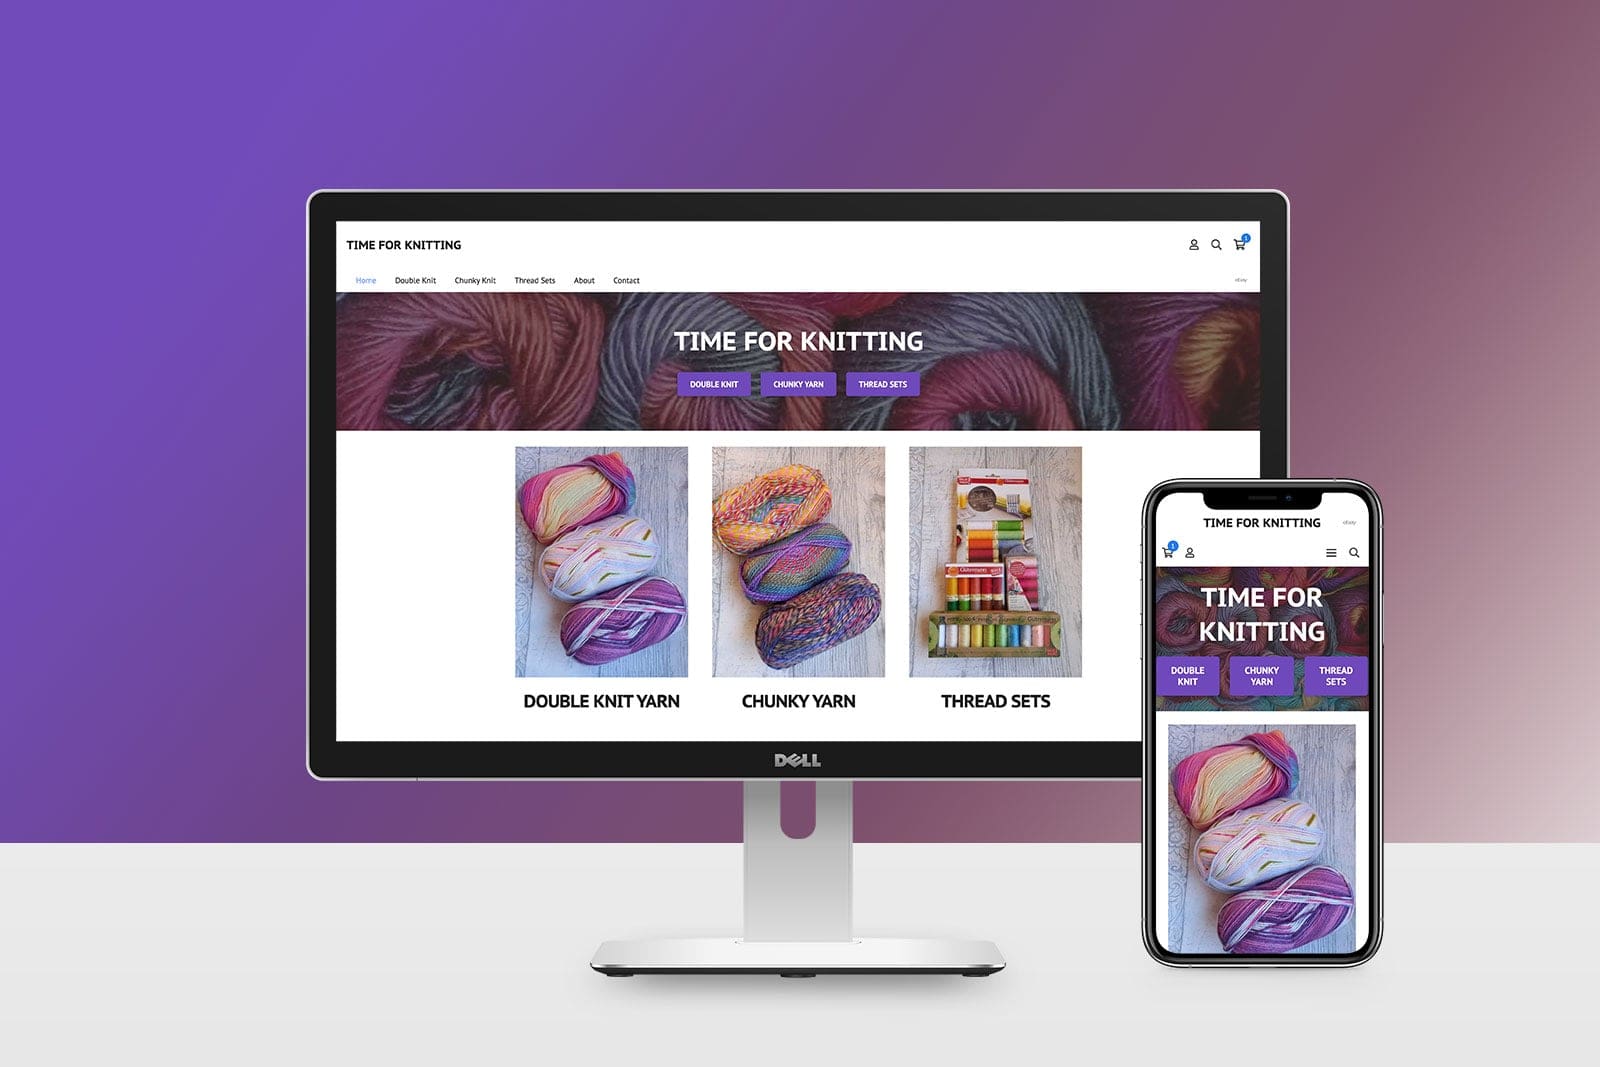 Desktop and Mobile View of the landing page for Time for Knitting